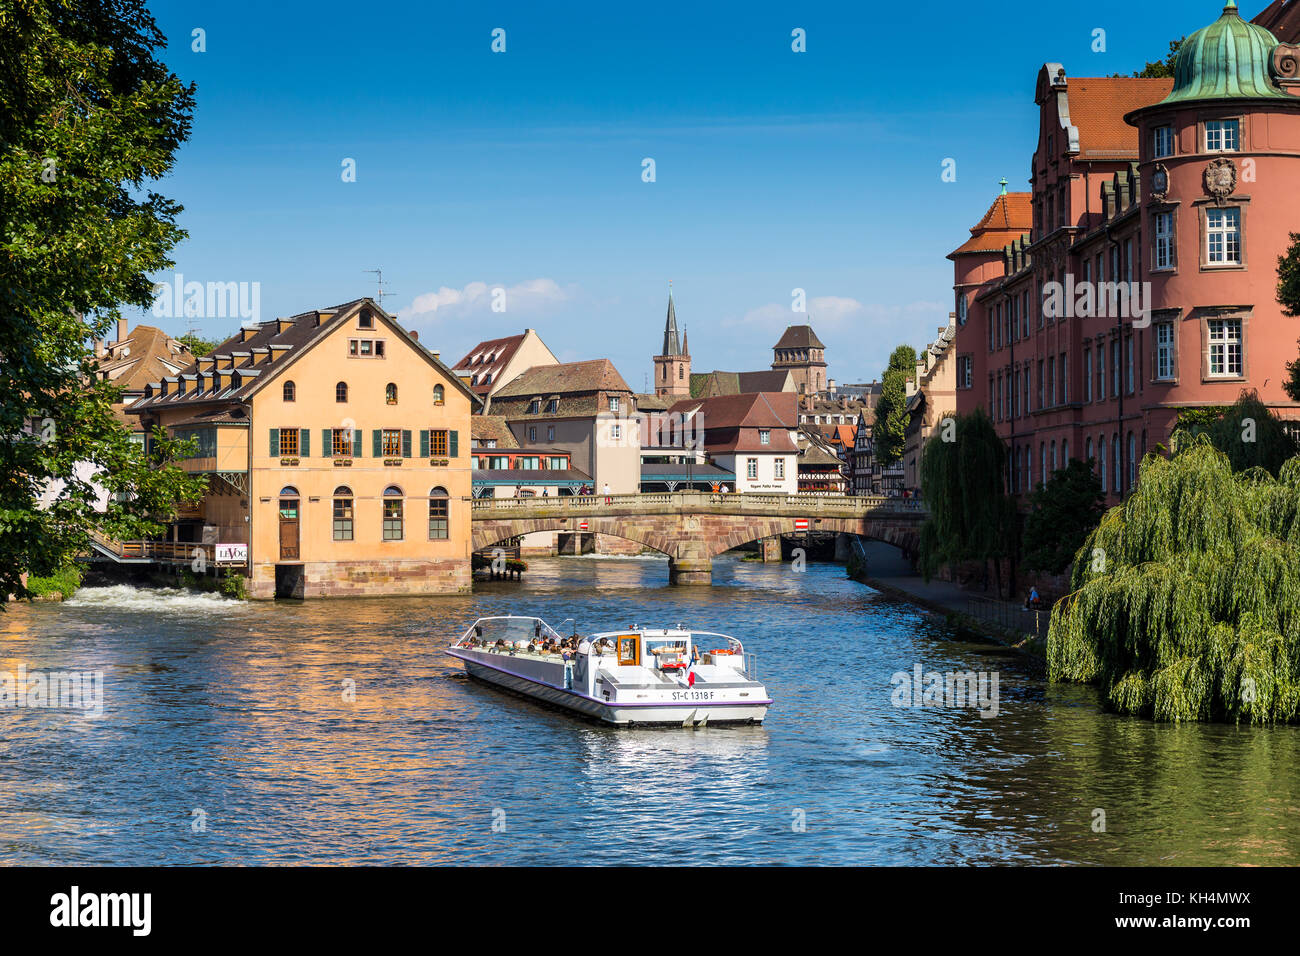 The Ill river in Petite France area with traditional architecture, Strasbourg, Alsace. Stock Photo